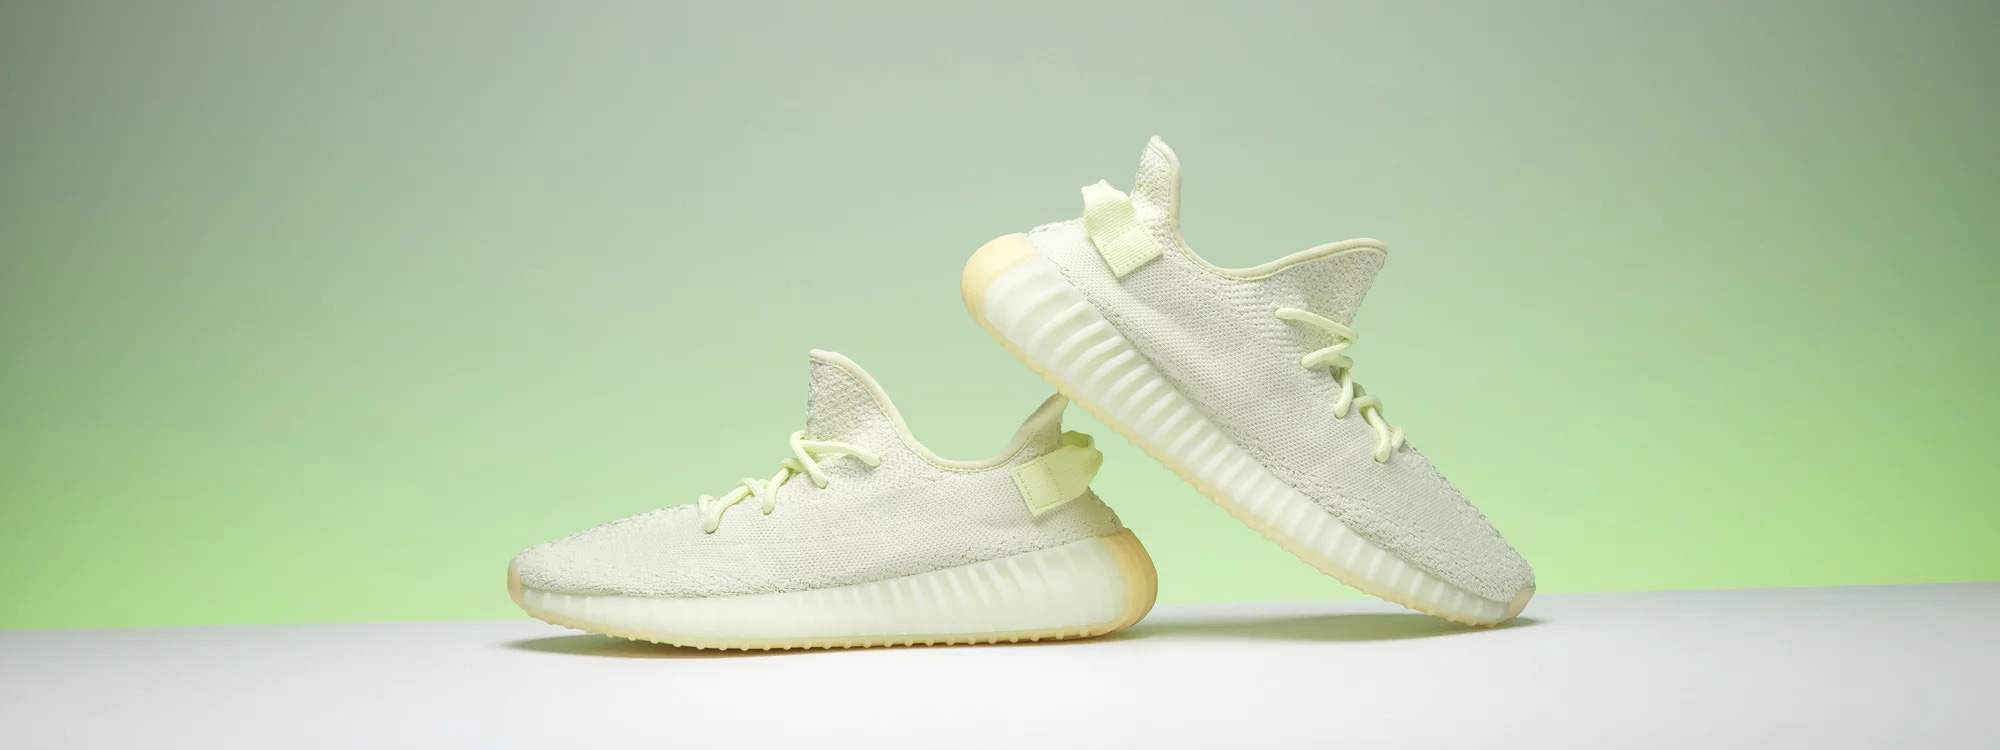 For sale Your size Adidas Yeezy Boost 350 V2 Butter online